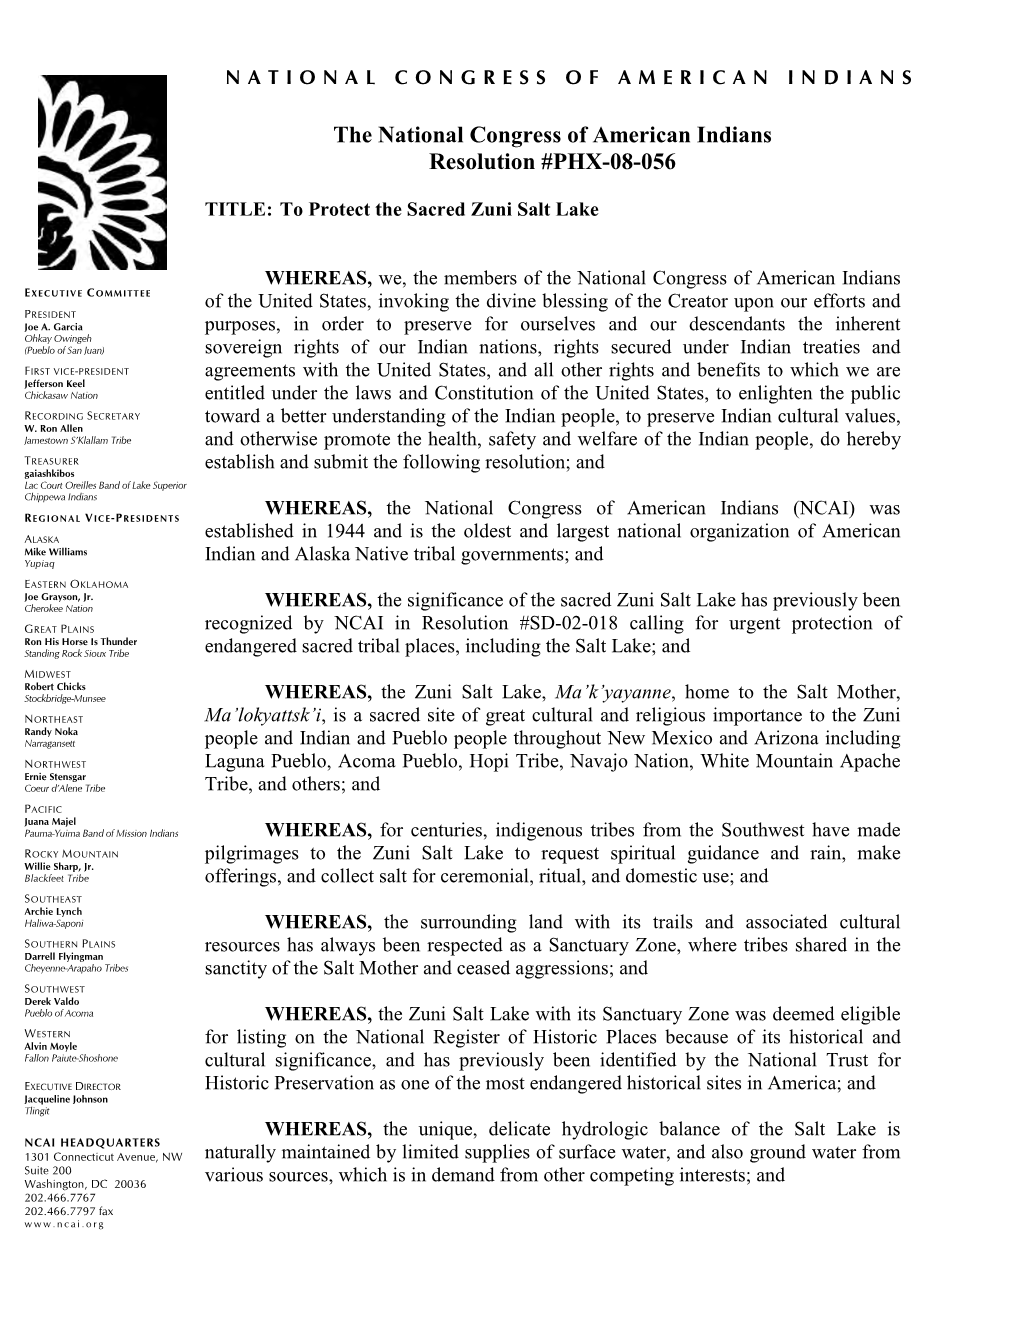 The National Congress of American Indians Resolution #PHX-08-056